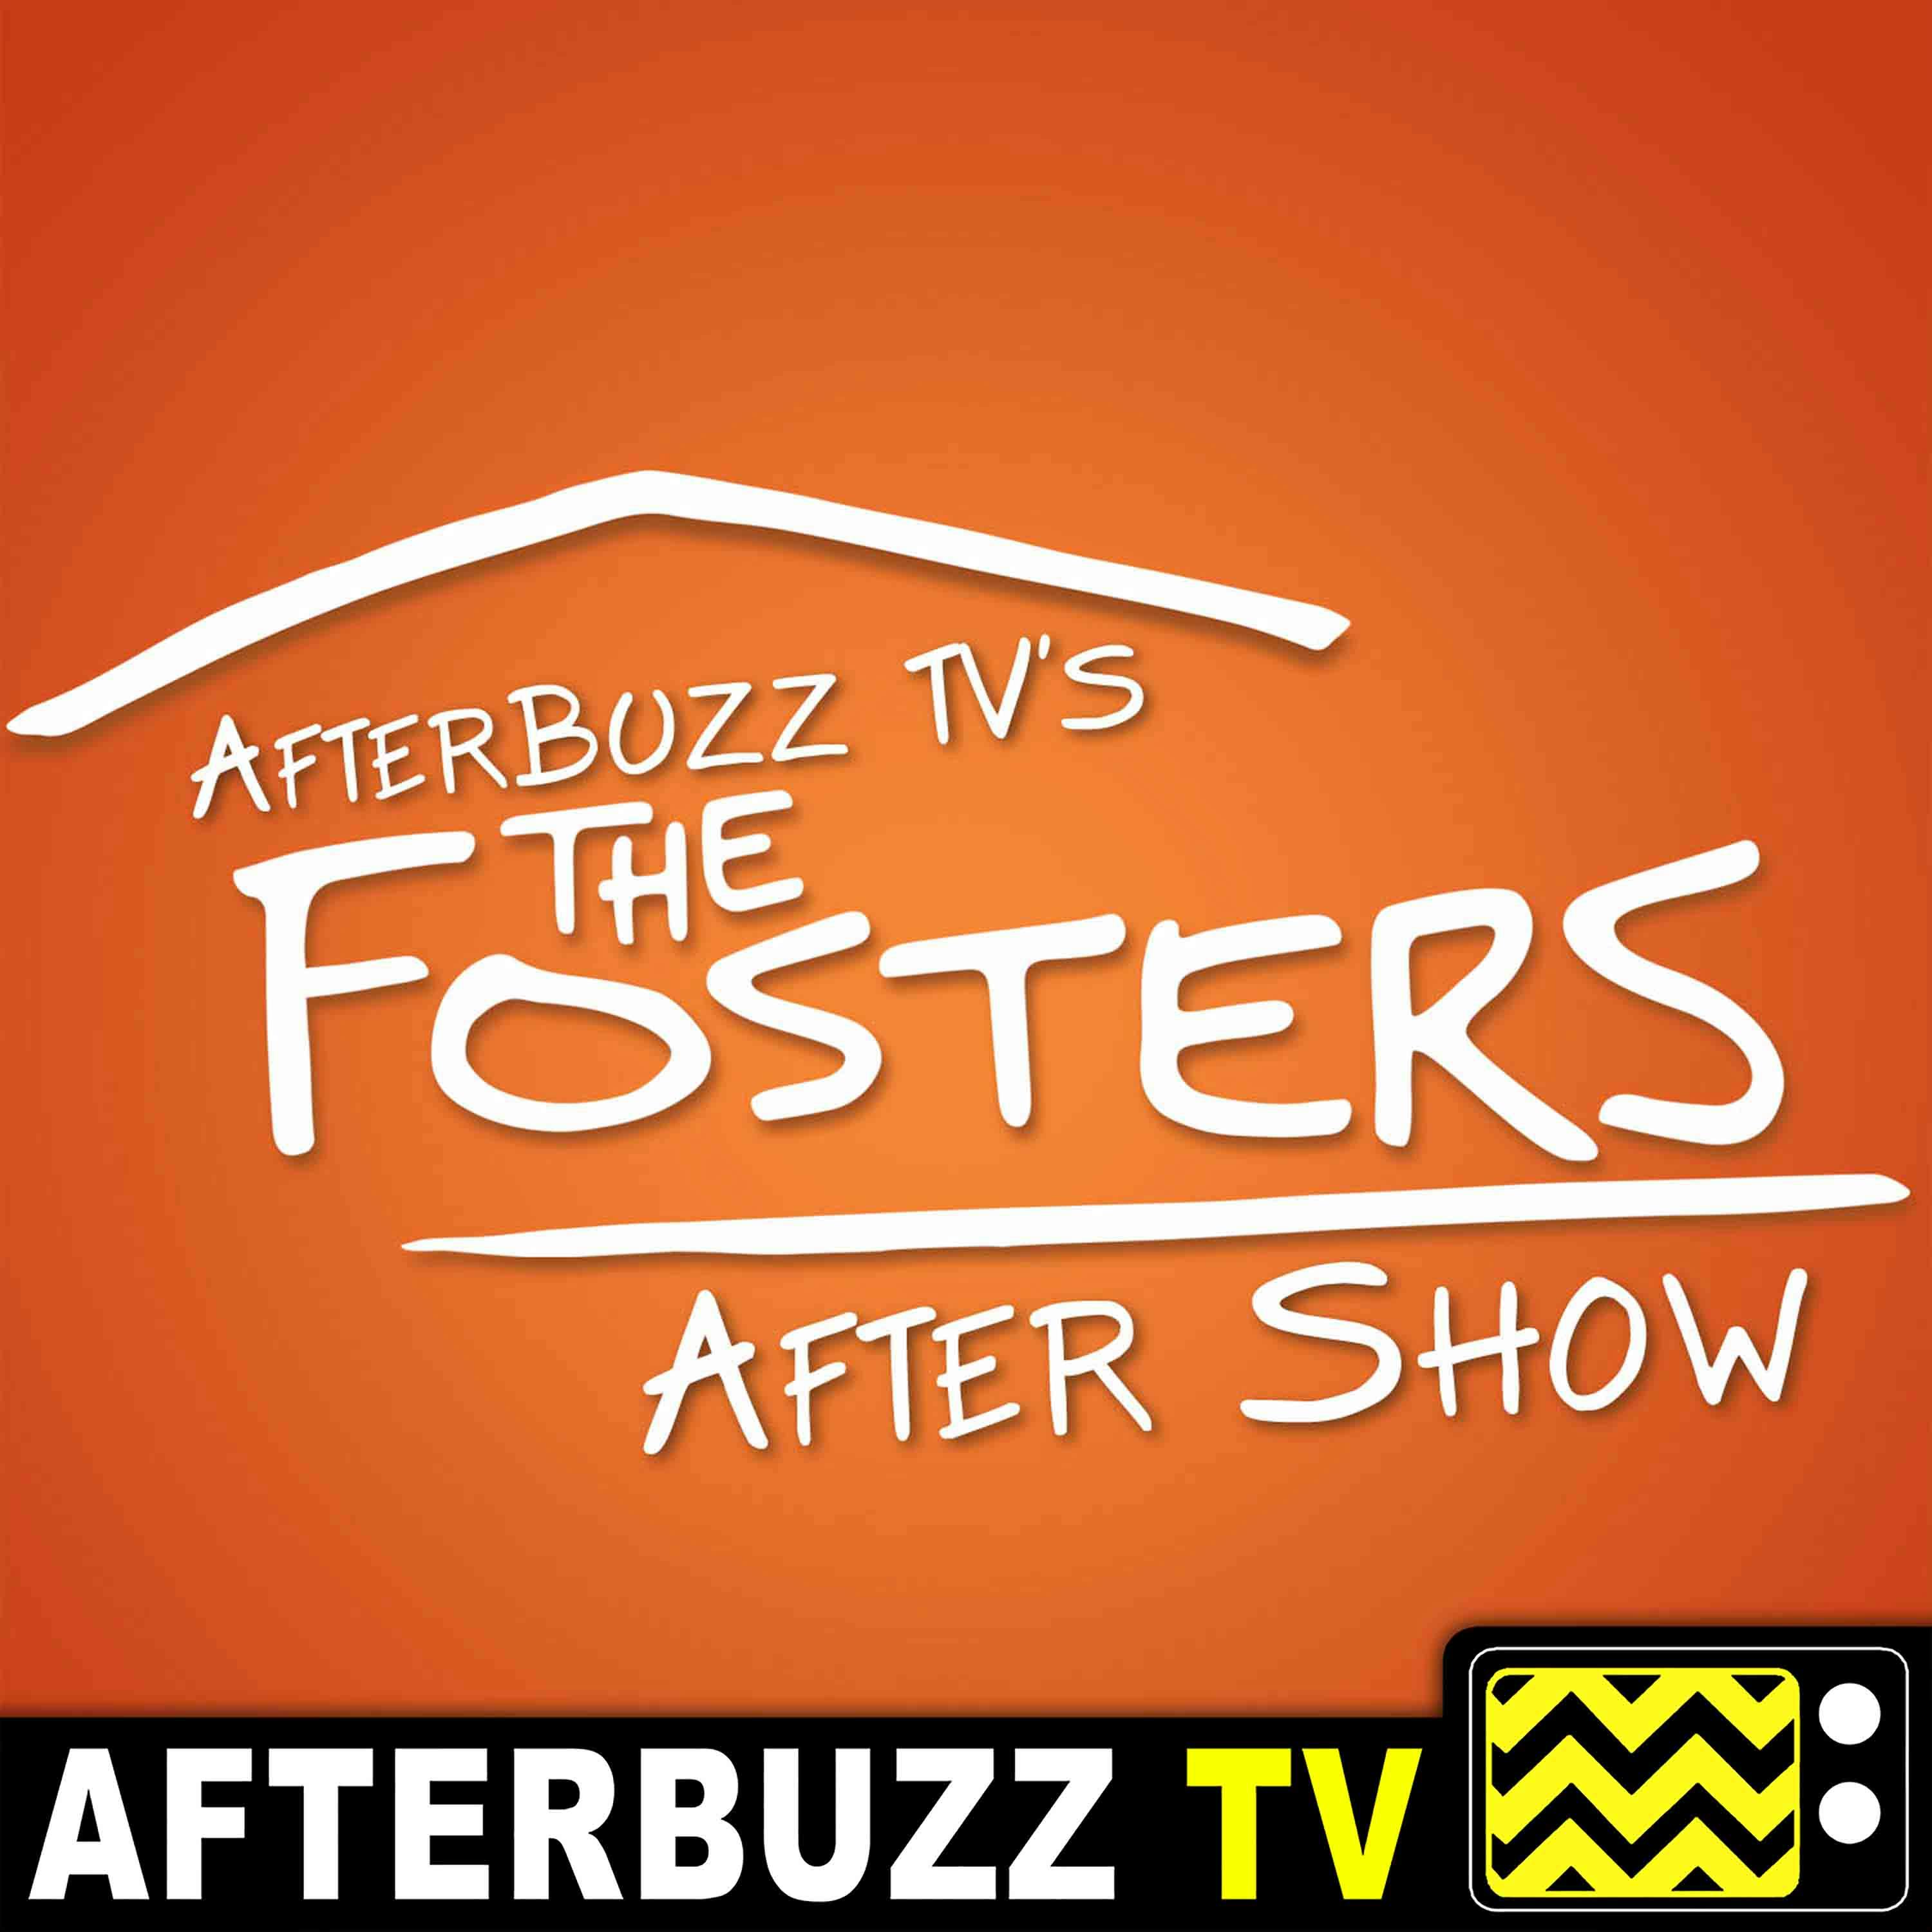 The Fosters S:4 | Ashley Argota and Jordan Rodrigues Guest on Collateral Damage E:10 | AfterBuzz TV AfterShow